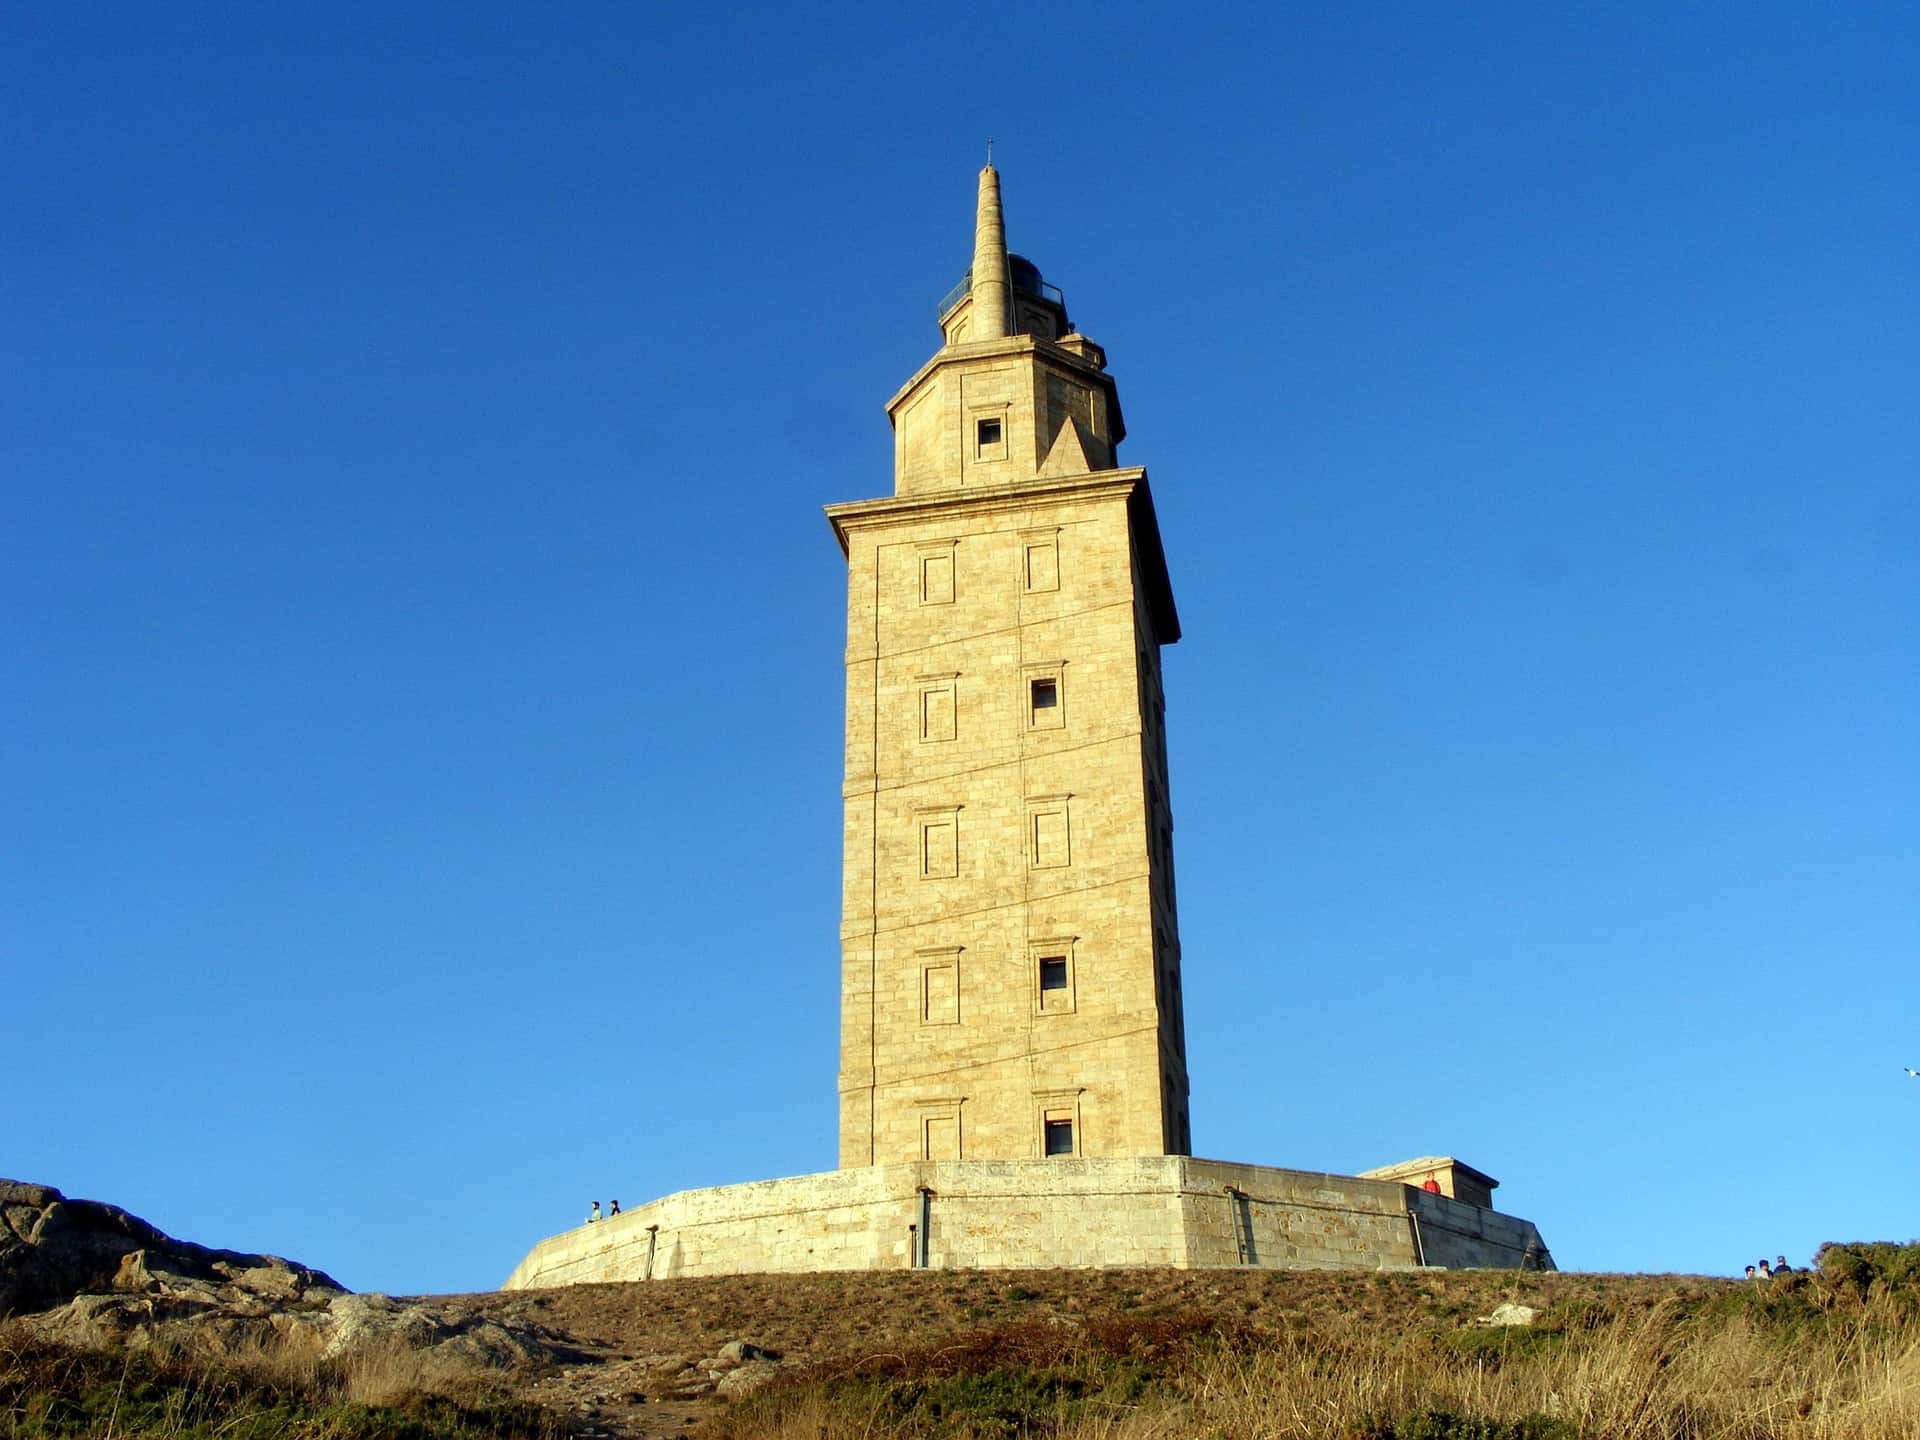 Spain - Galicia - Tower of Hercules UNESCO World Heritage Site Lighthouse